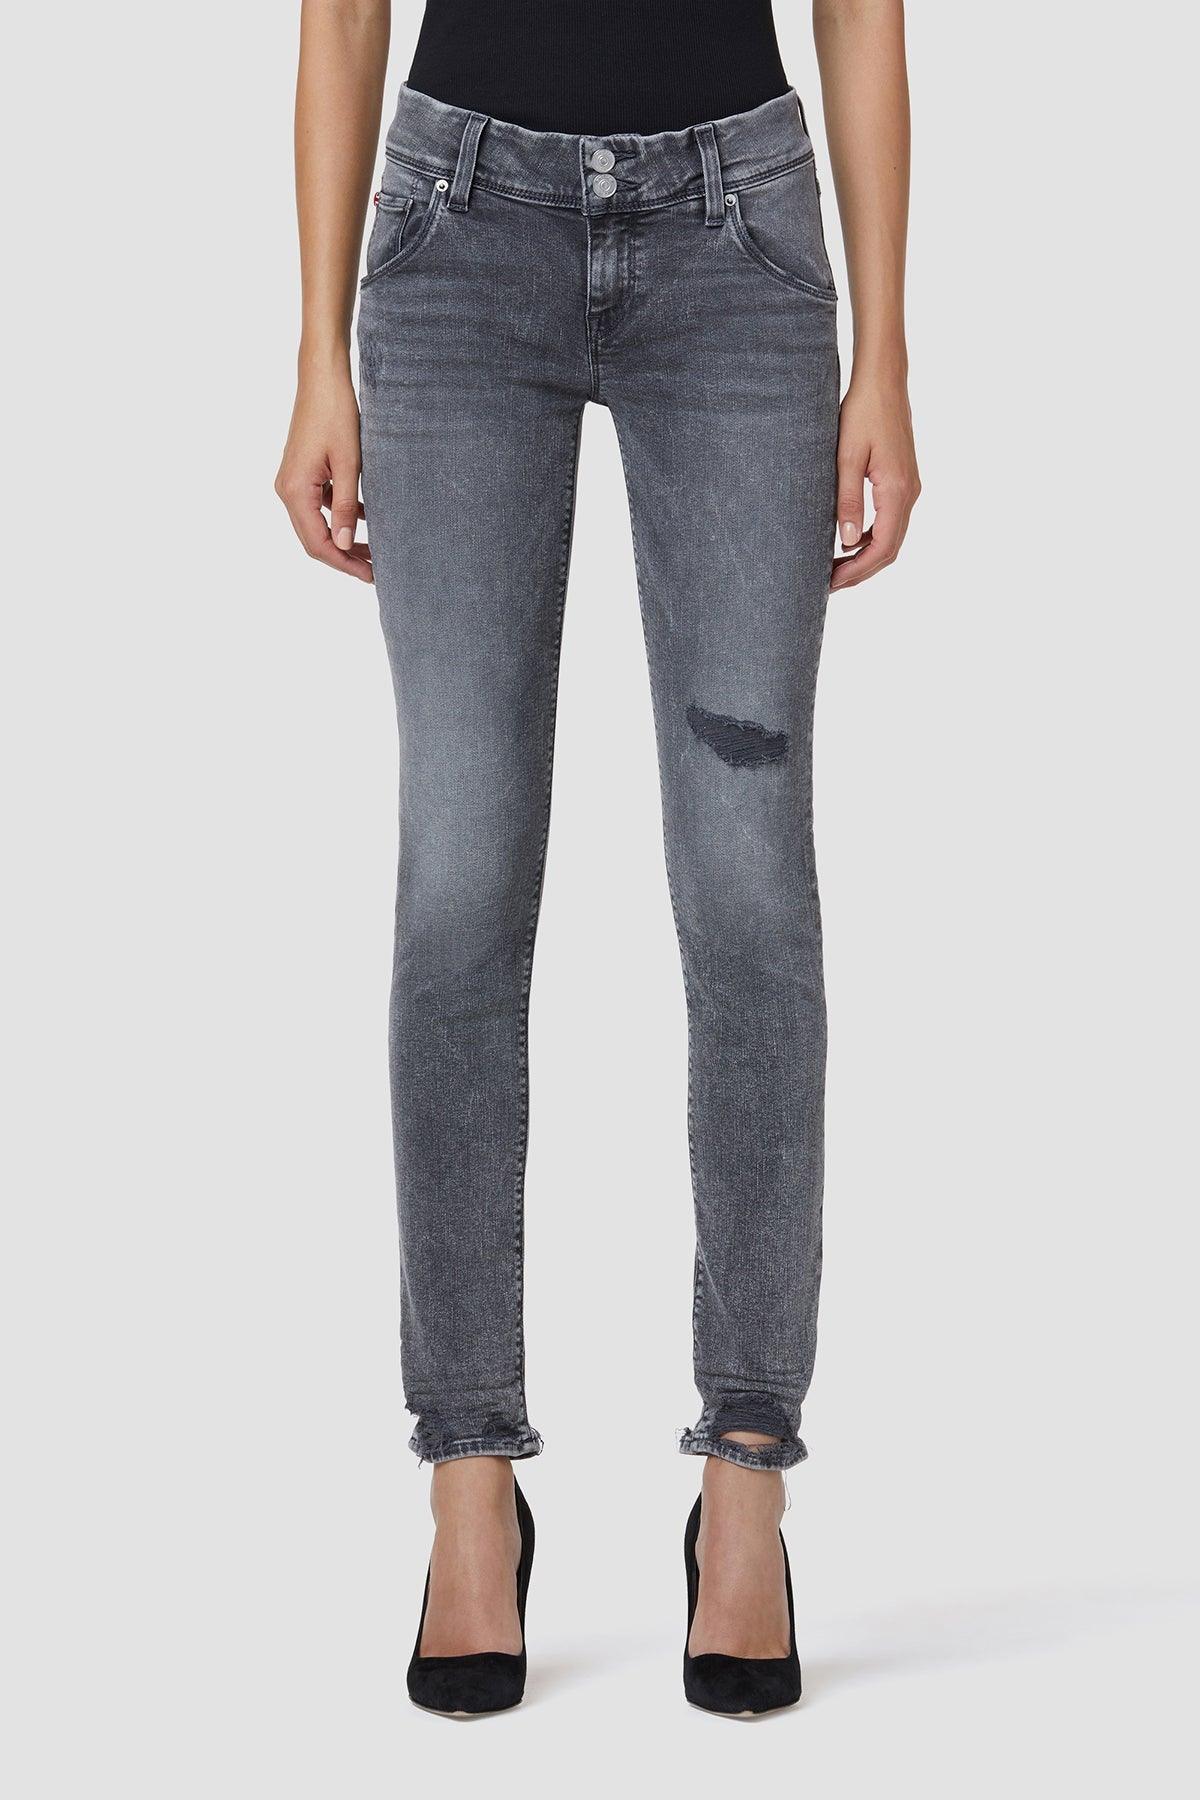 Collin Midrise Skinny Jeans in Thunderstruck by Hudson - Haven